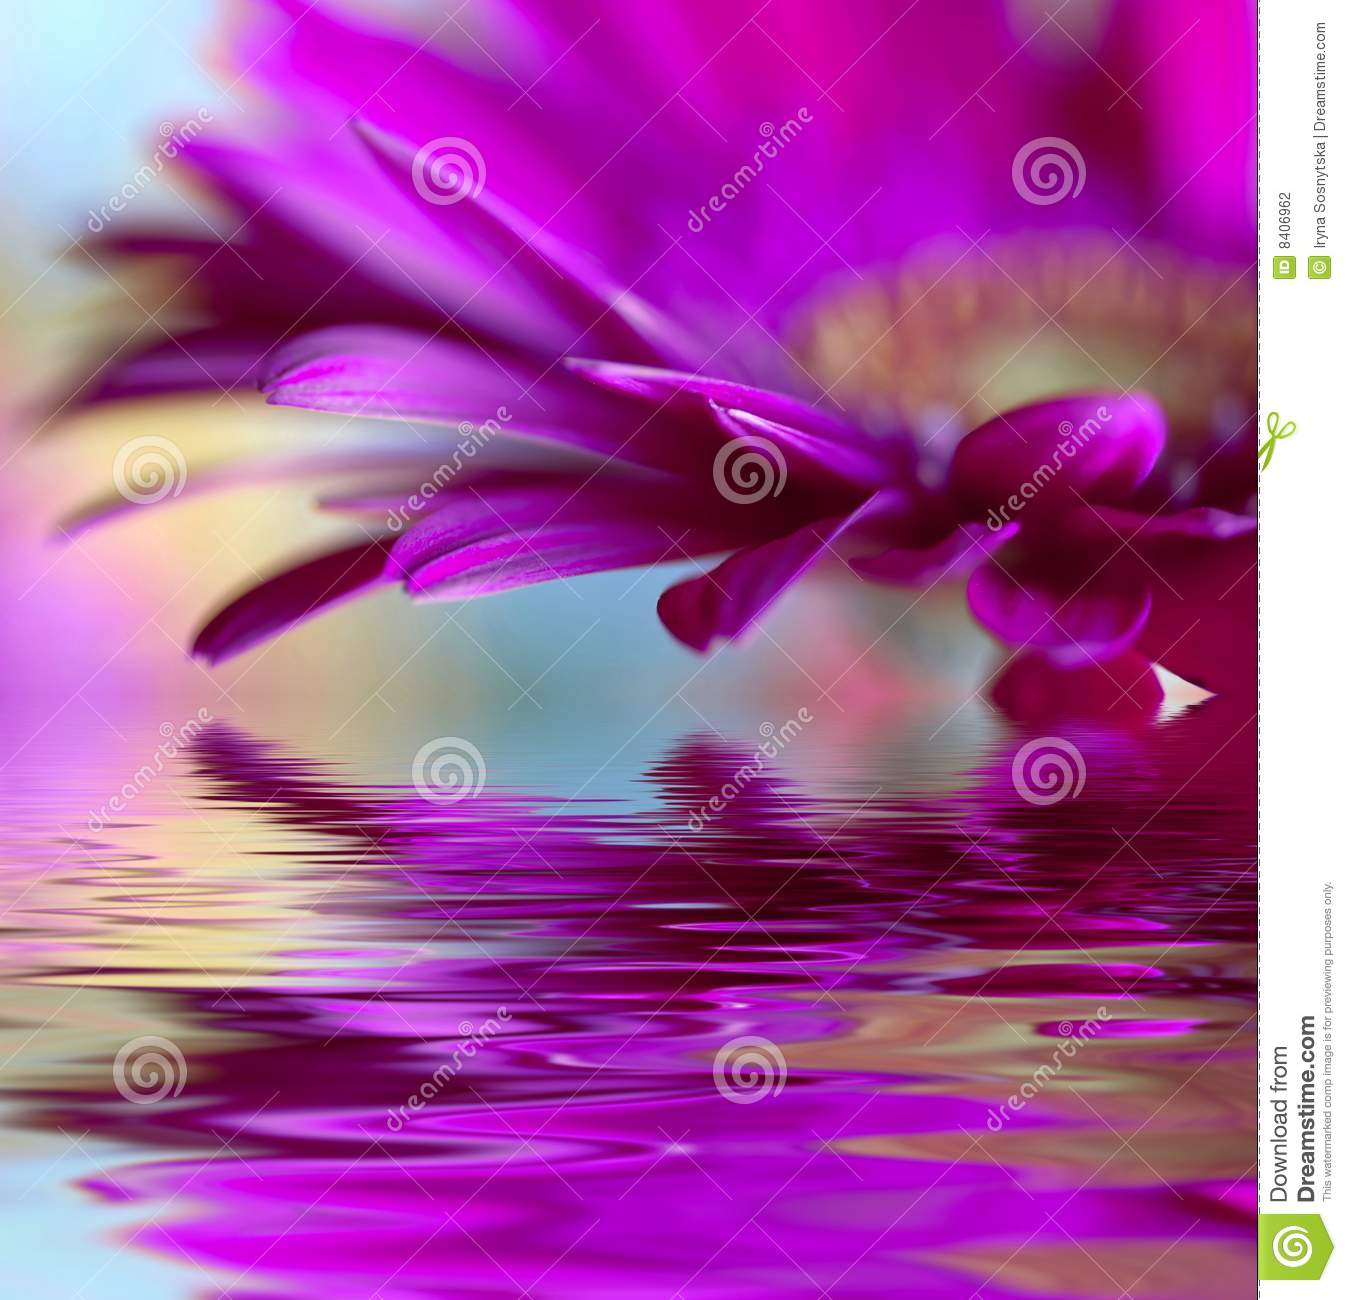 Closeup Of Violet Daisy Gerbera With Soft Focus Reflected In The Water    